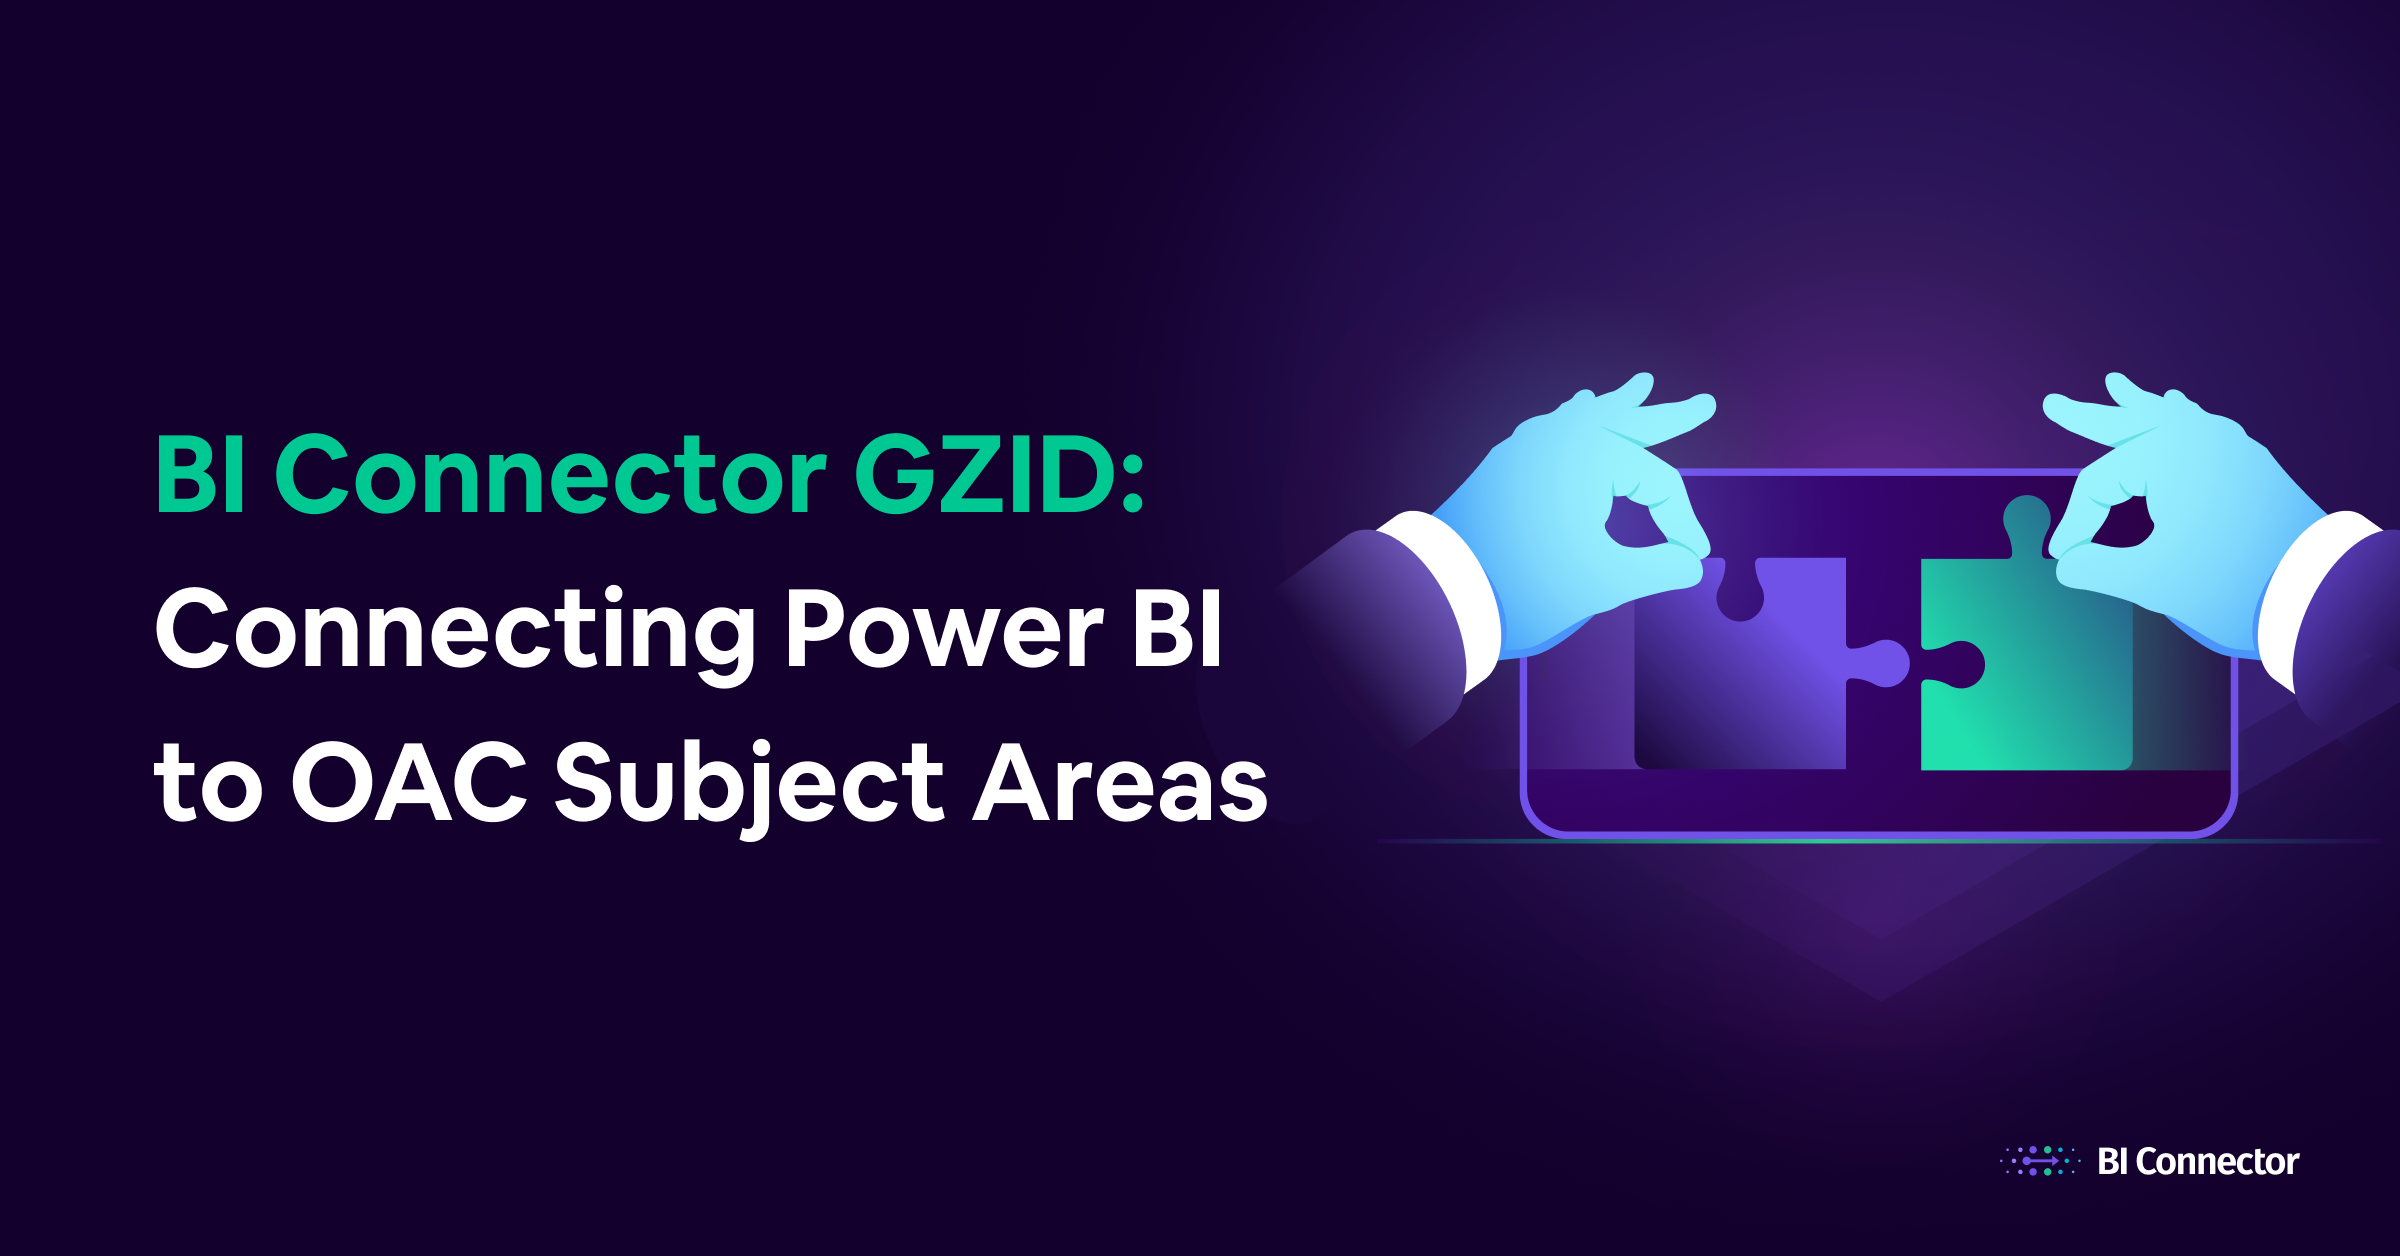 BI Connector GZID_ Connecting Power BI to OAC Subject Areas